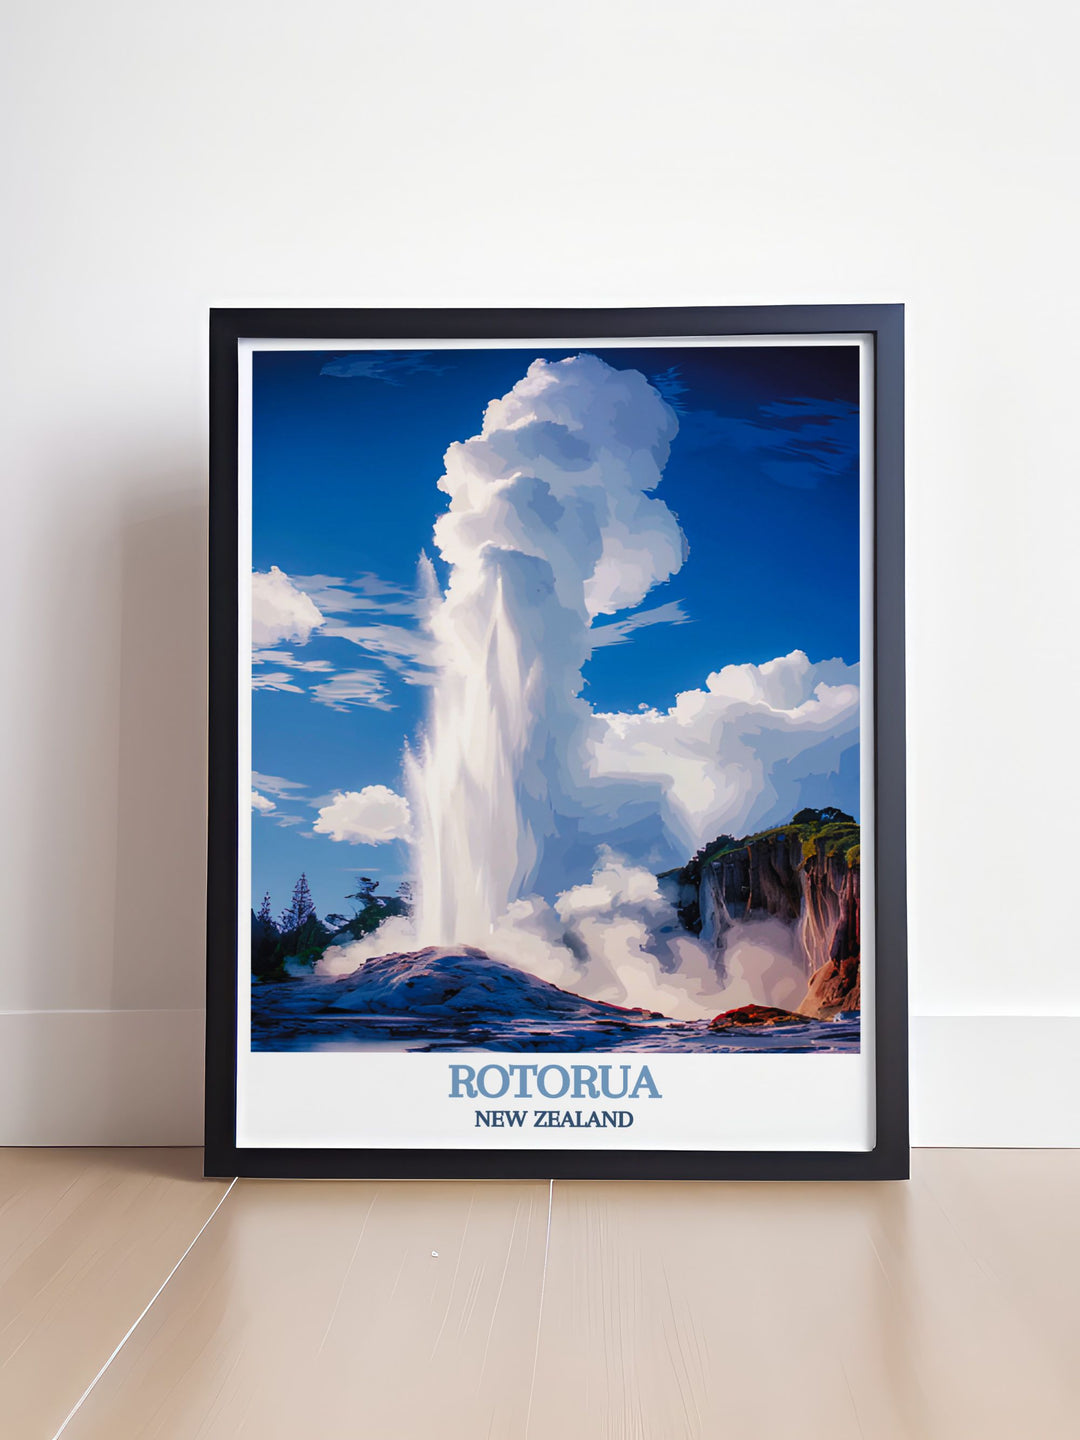 Serene Te Puia wall art depicting the dynamic geothermal activity and lush landscapes of Rotorua New Zealand. Ideal for creating a calming and inspiring environment in any space. This artwork beautifully represents Te PuiaS natural beauty.